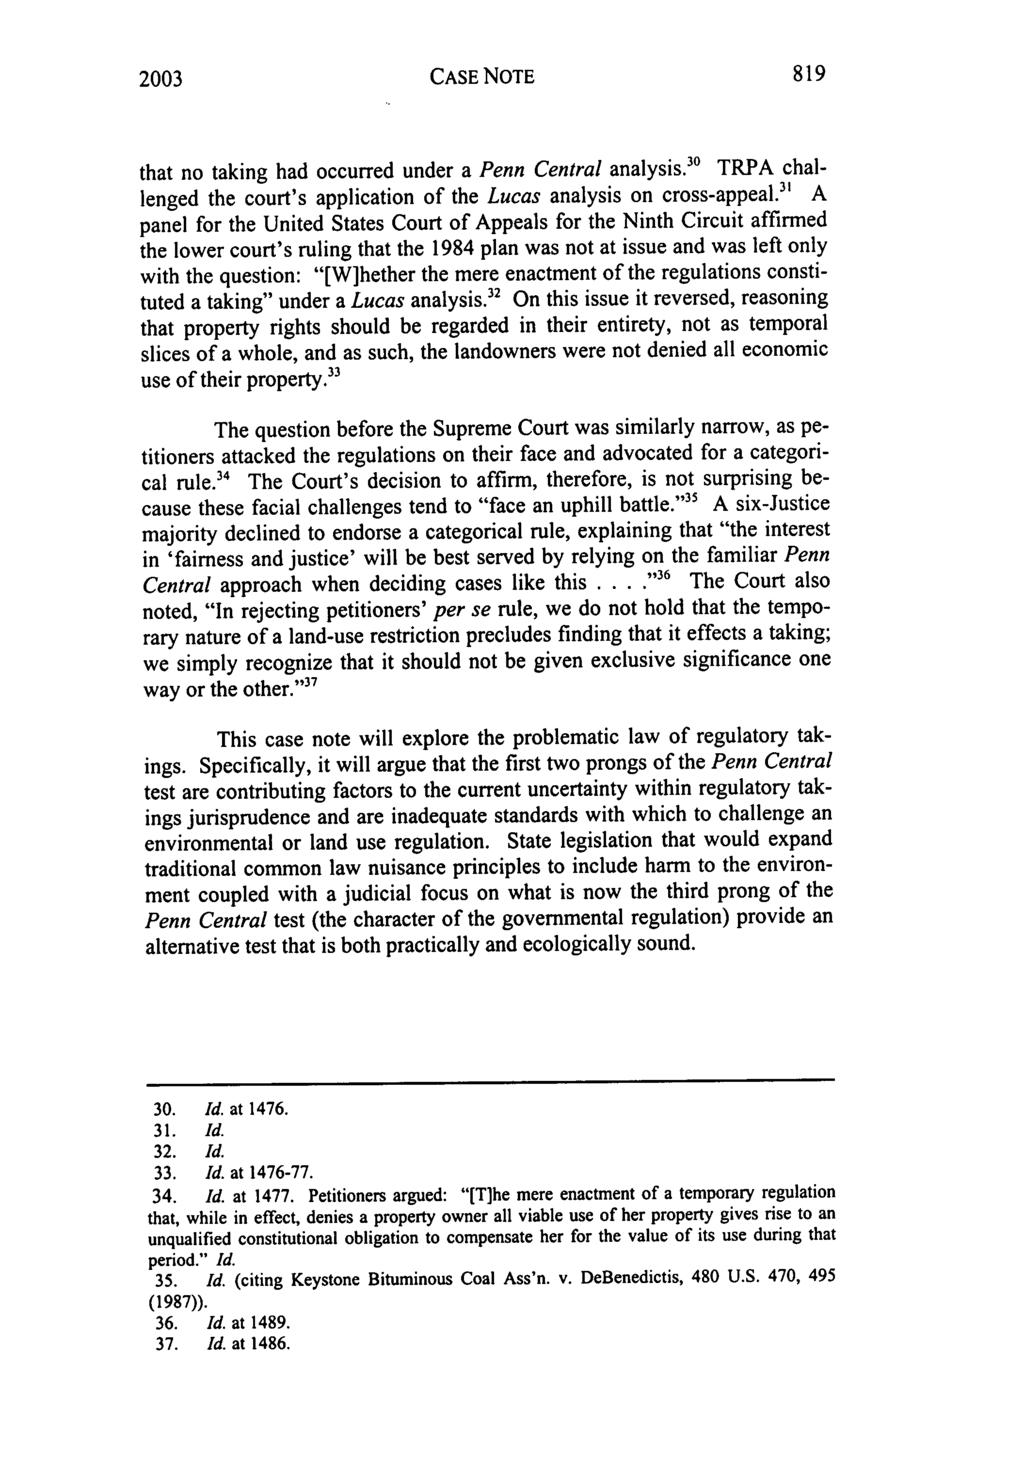 2003 CASE NOTE that no taking had occurred under a Penn Central analysis. 3 " TRPA challenged the court's application of the Lucas analysis on cross-appeal.